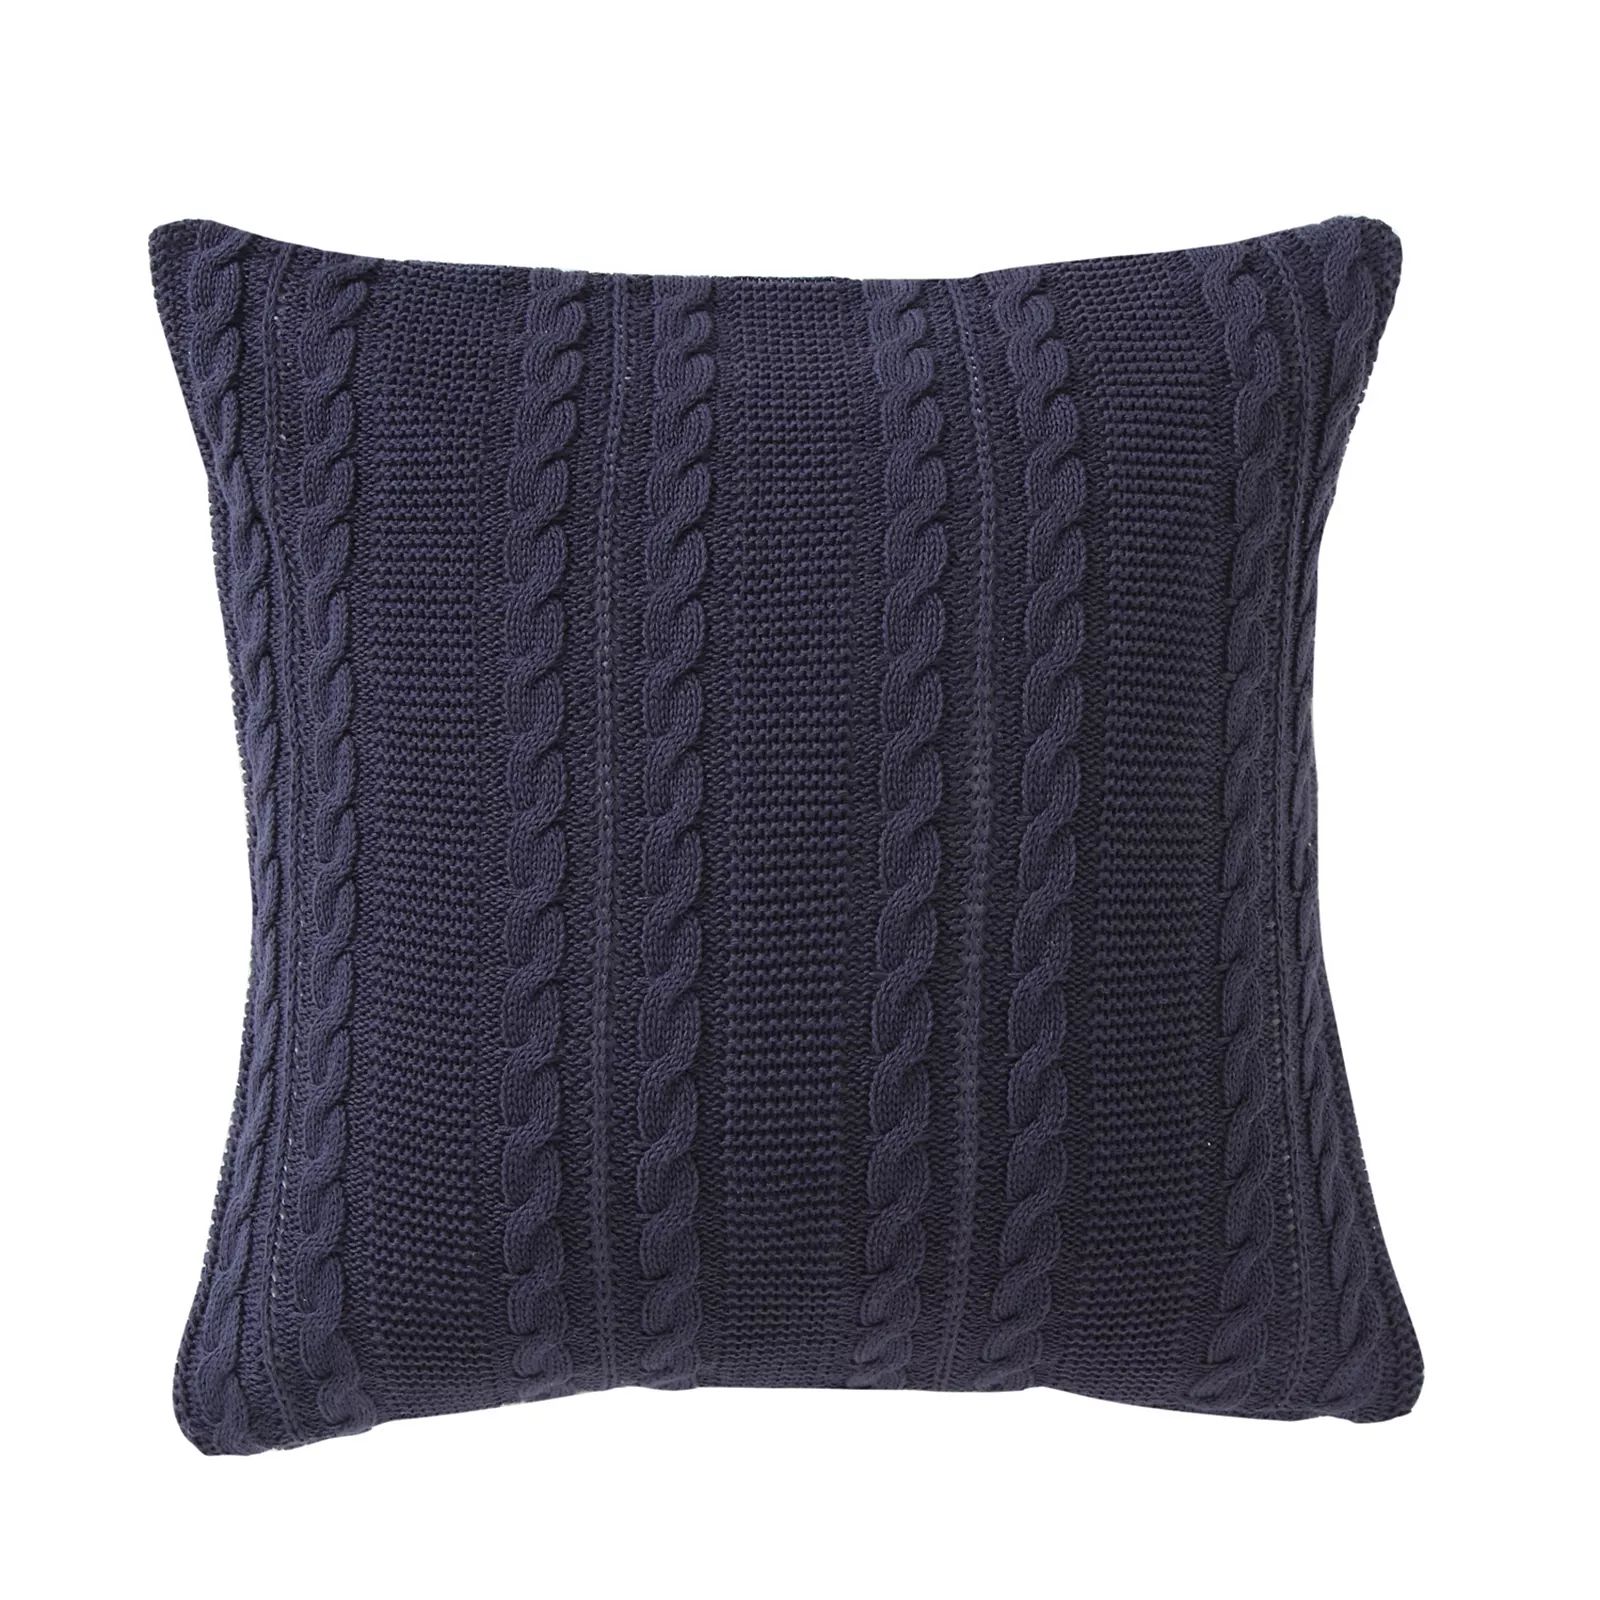 VCNY Dublin Cable Knit Throw Pillow, Blue, Fits All | Kohl's